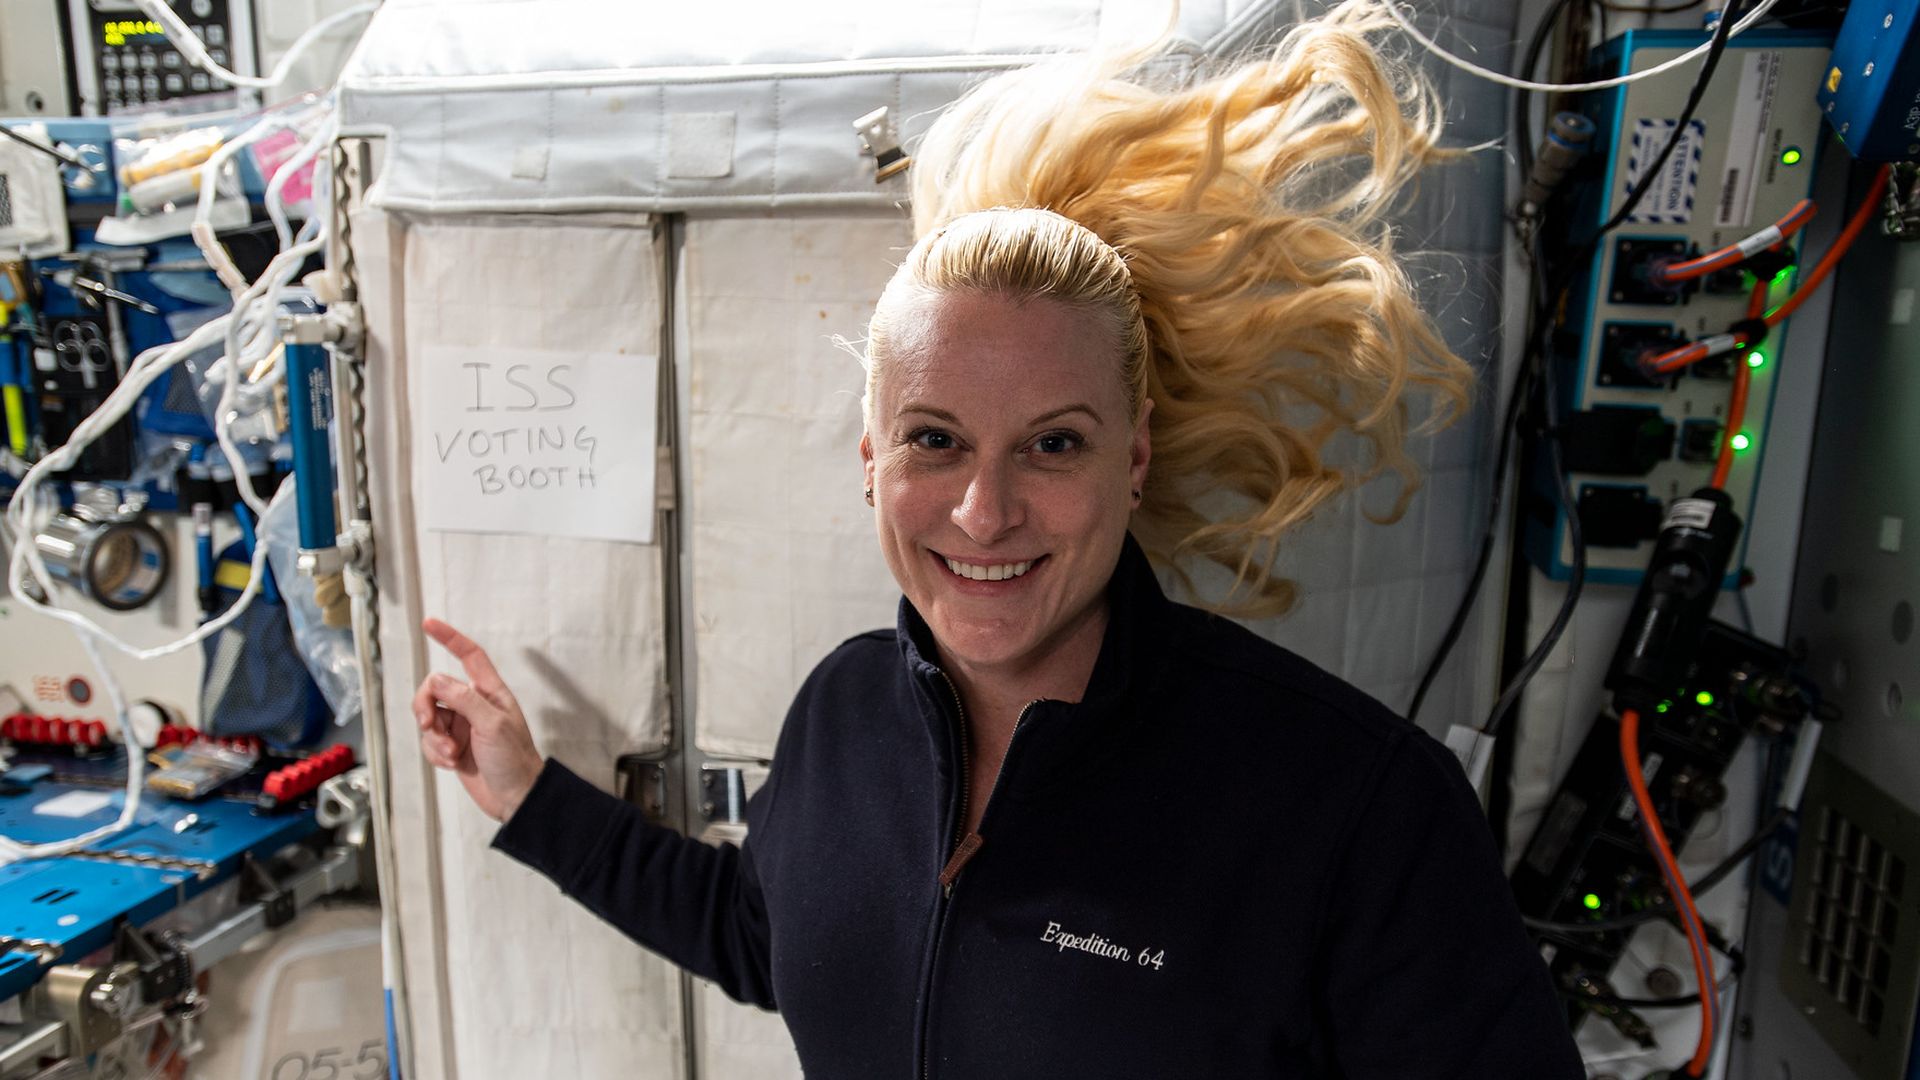 Astronaut Kate Rubins floating in front of a sign that says "ISS voting booth" 